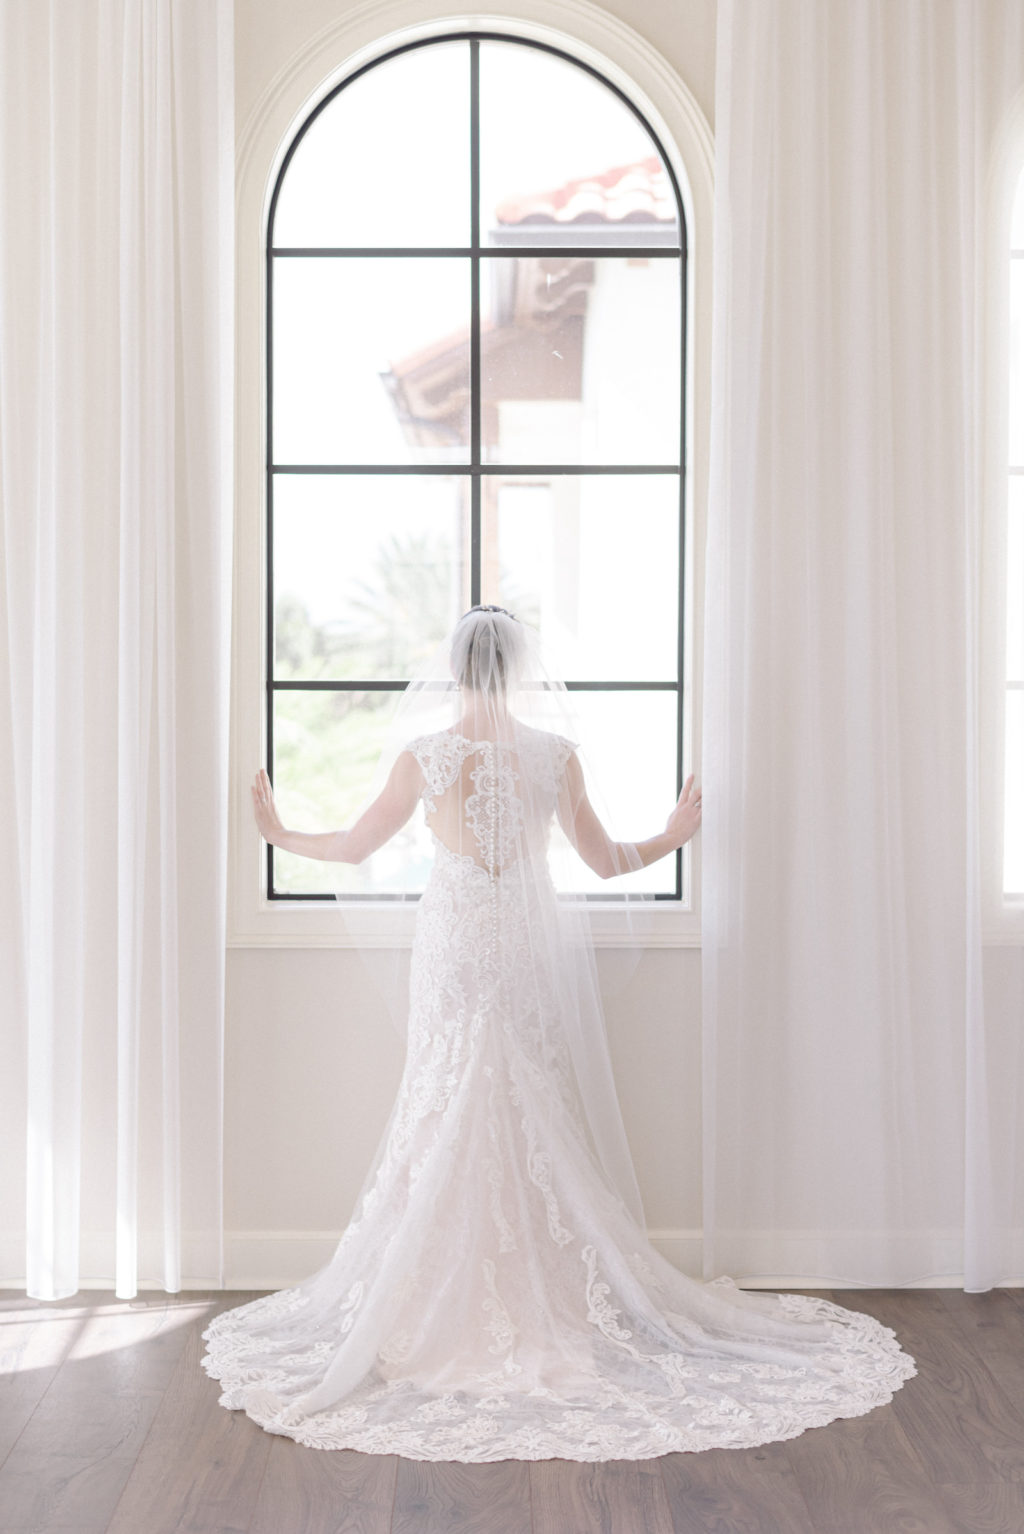 Tampa Bride Looking Out Window Wearing Lace and Illusion Wedding Dress